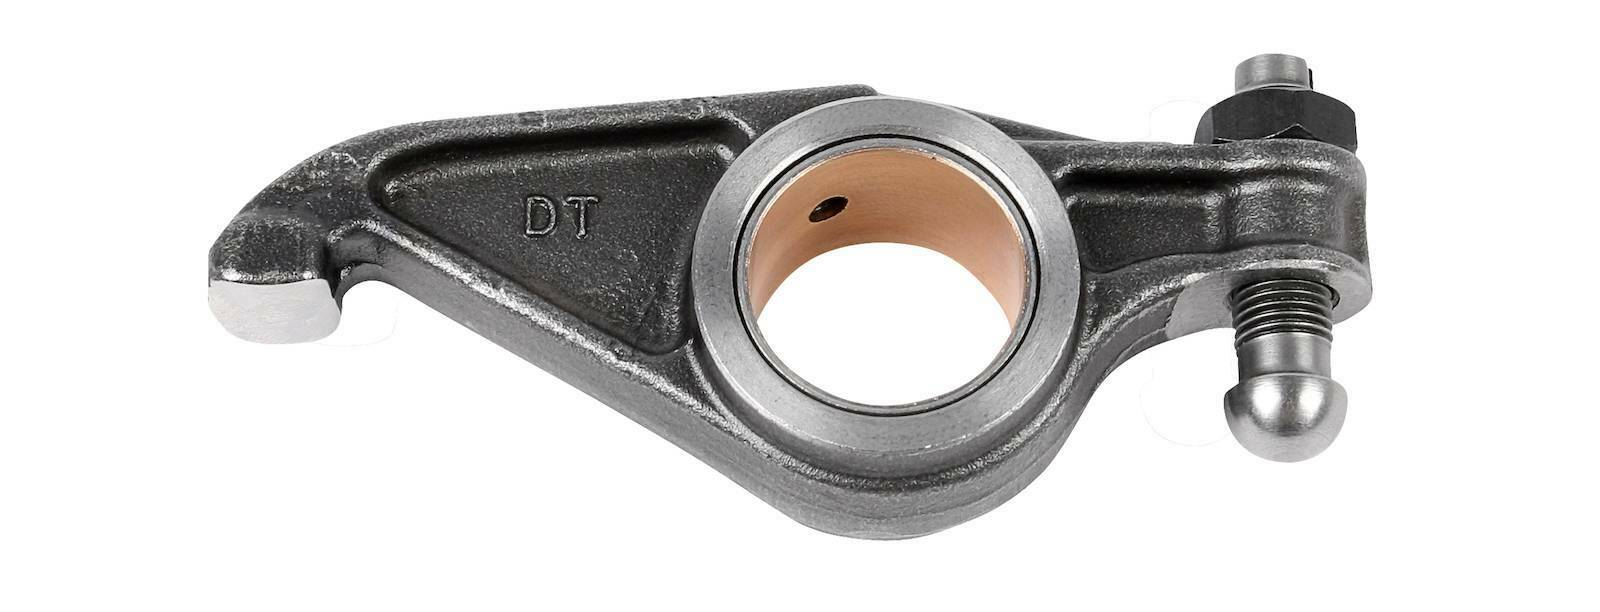 Rocker arm DT Spare Parts 2.10151 Rocker arm intake and exhaust d: 25 mm 3/8"